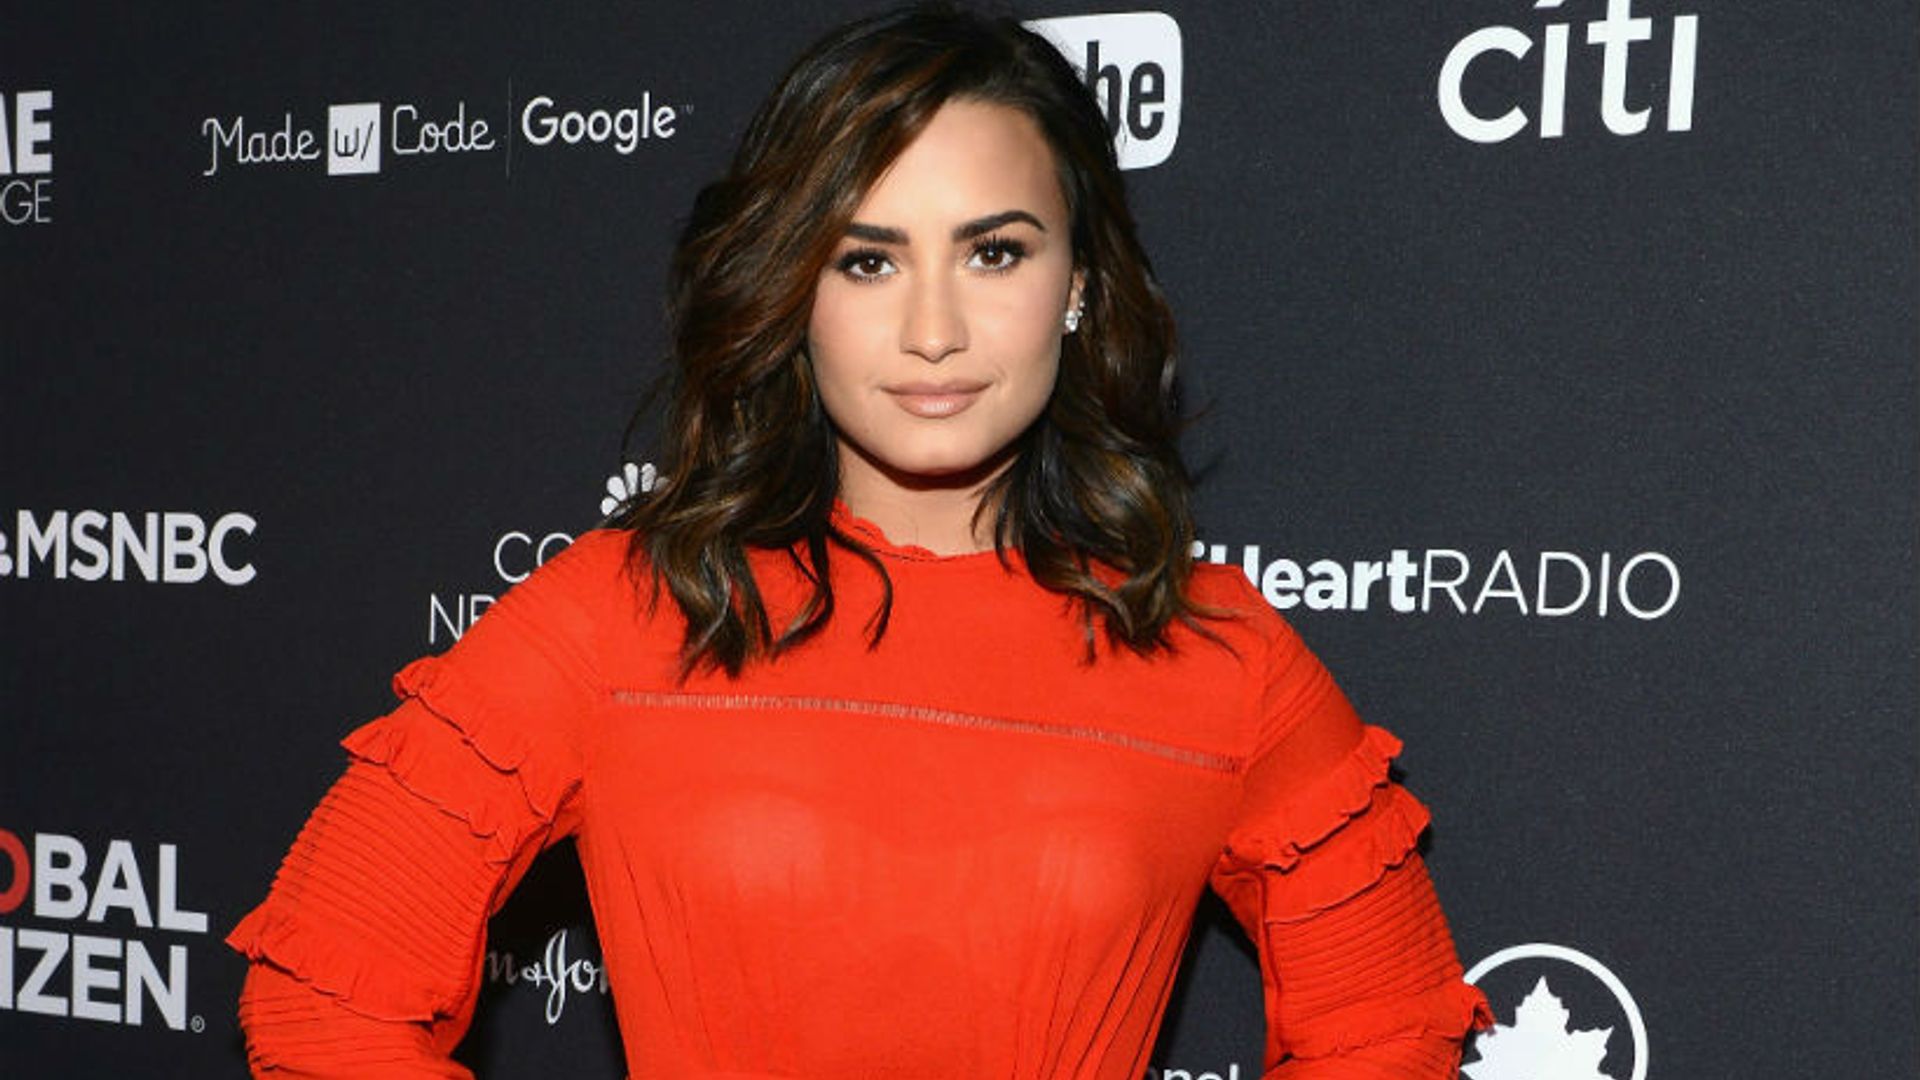 Demi Lovato is awake in hospital as her rep releases a statement surrounding overdose rumours